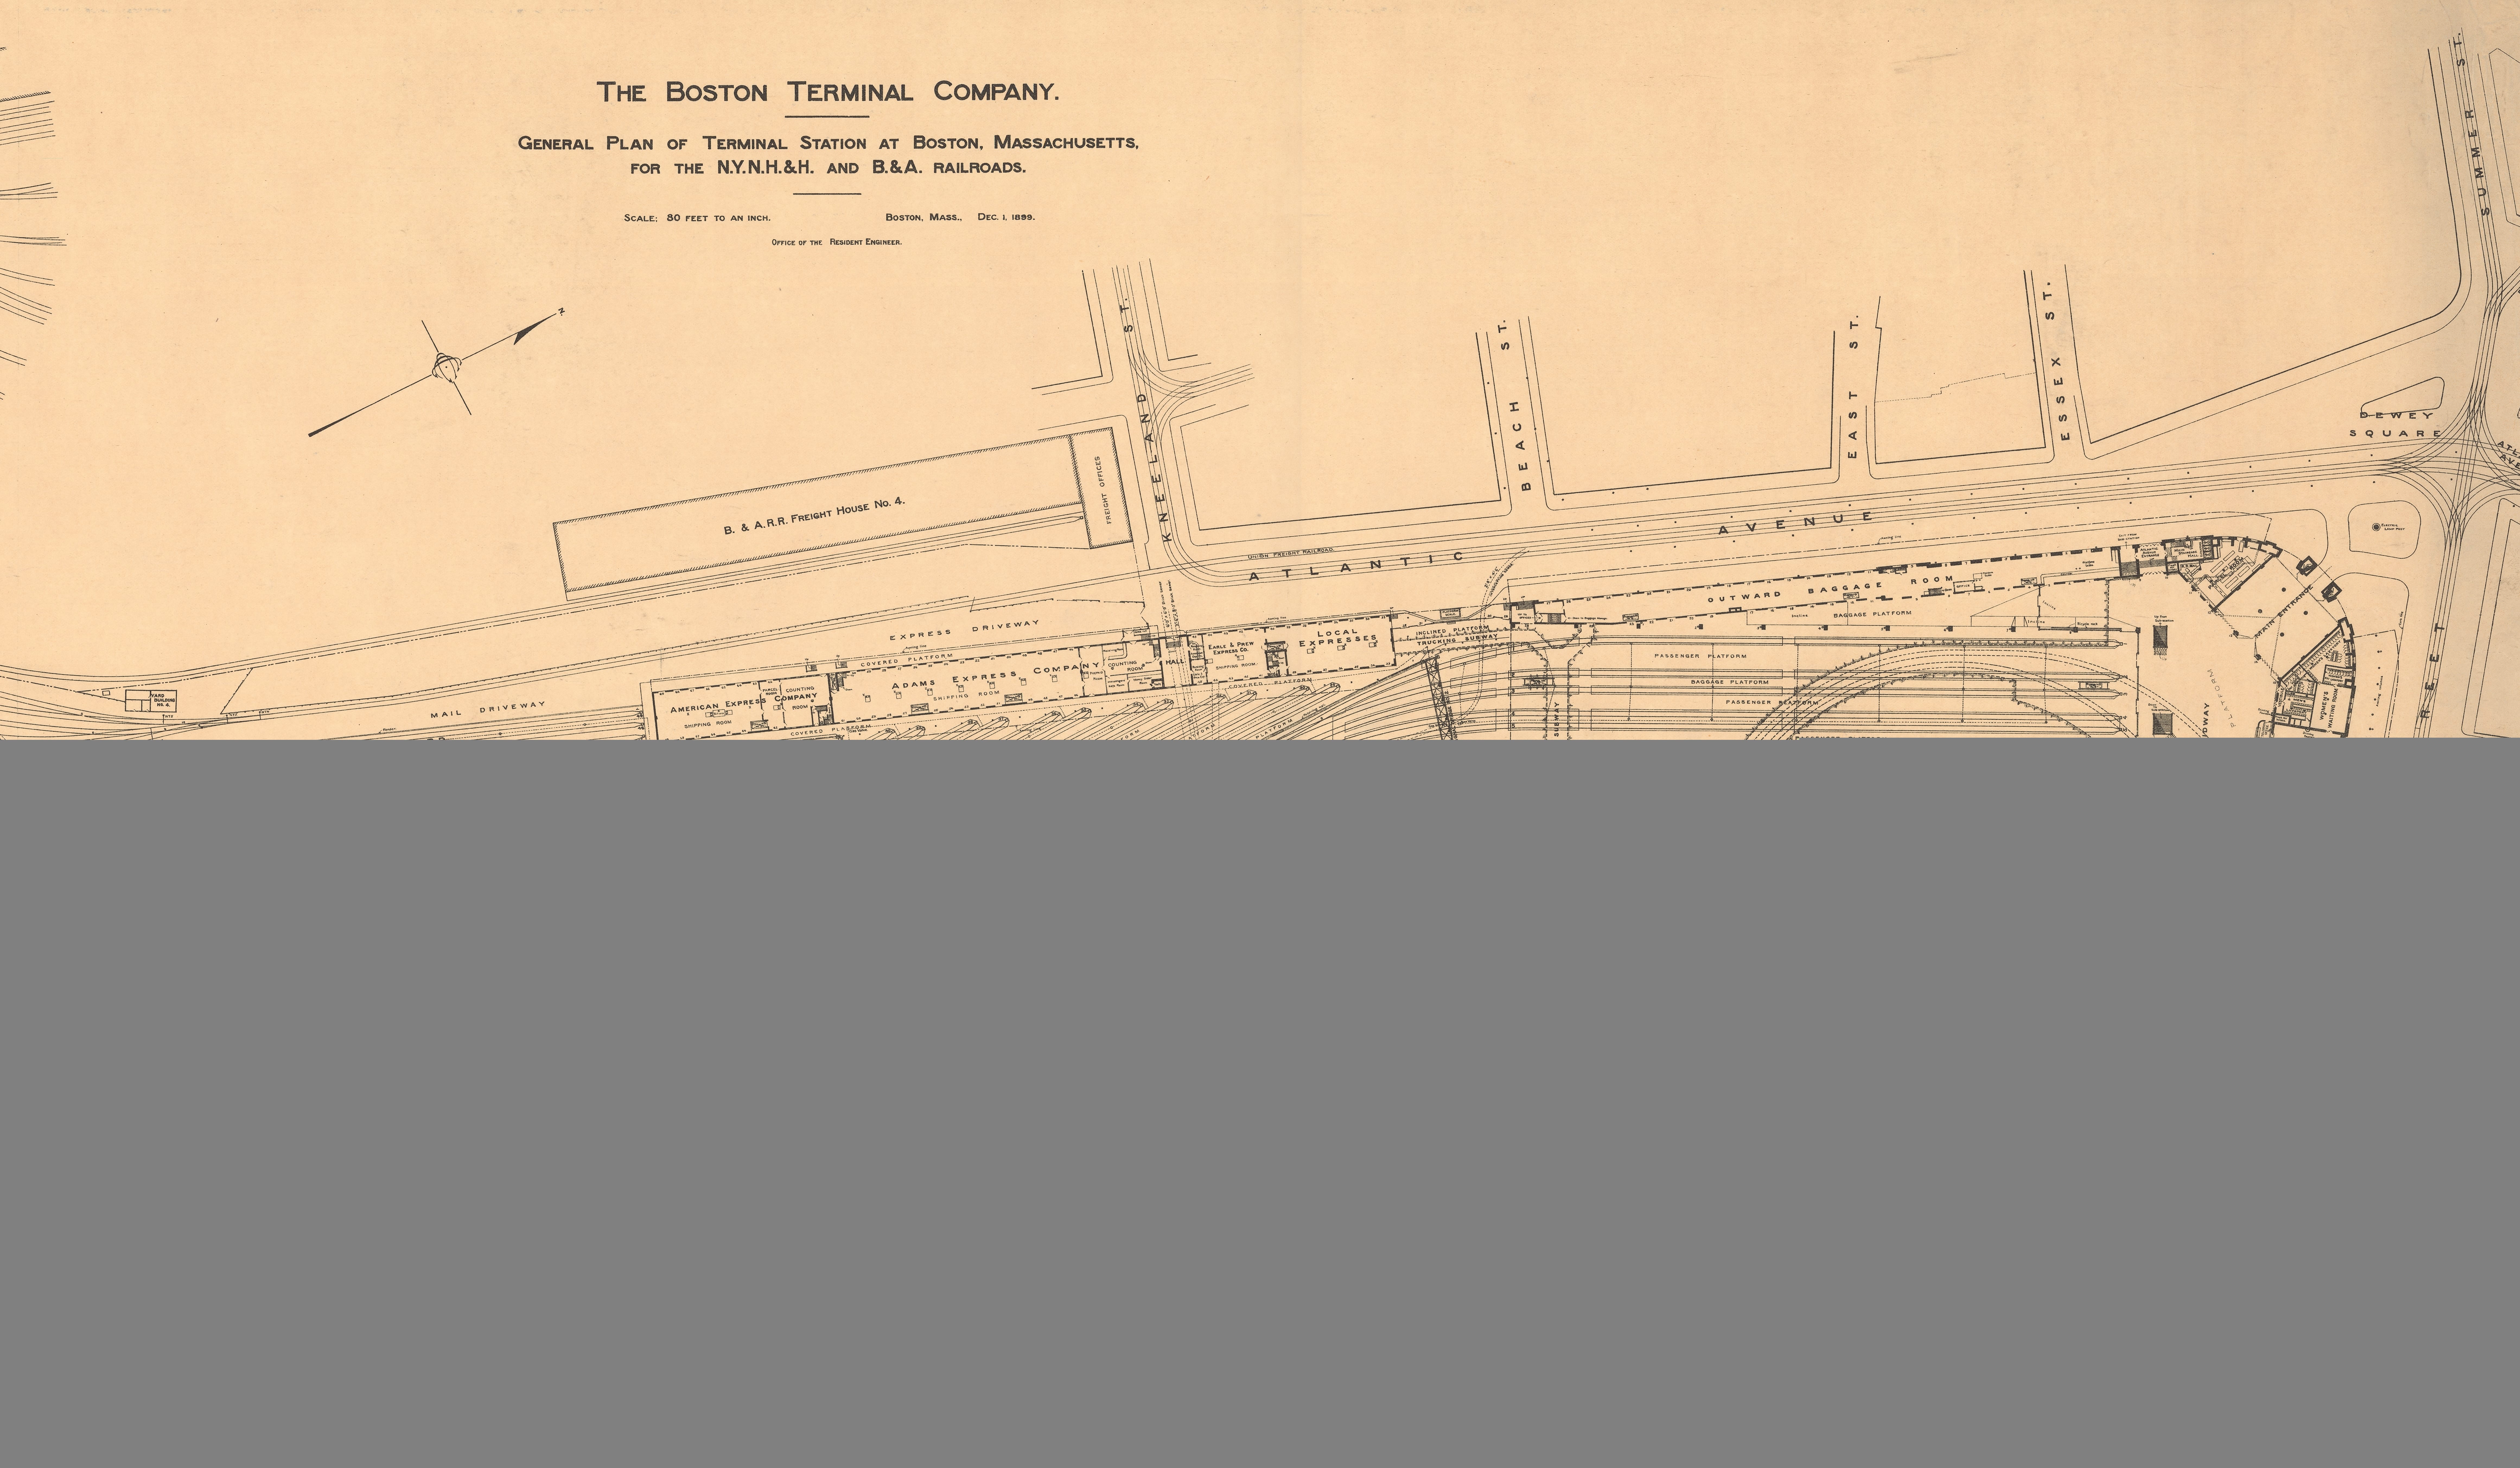 Image of General Plan of Terminal Station at Boston, Massachusetts, for the N.Y. N.H. & H. and B. & A. Railroads